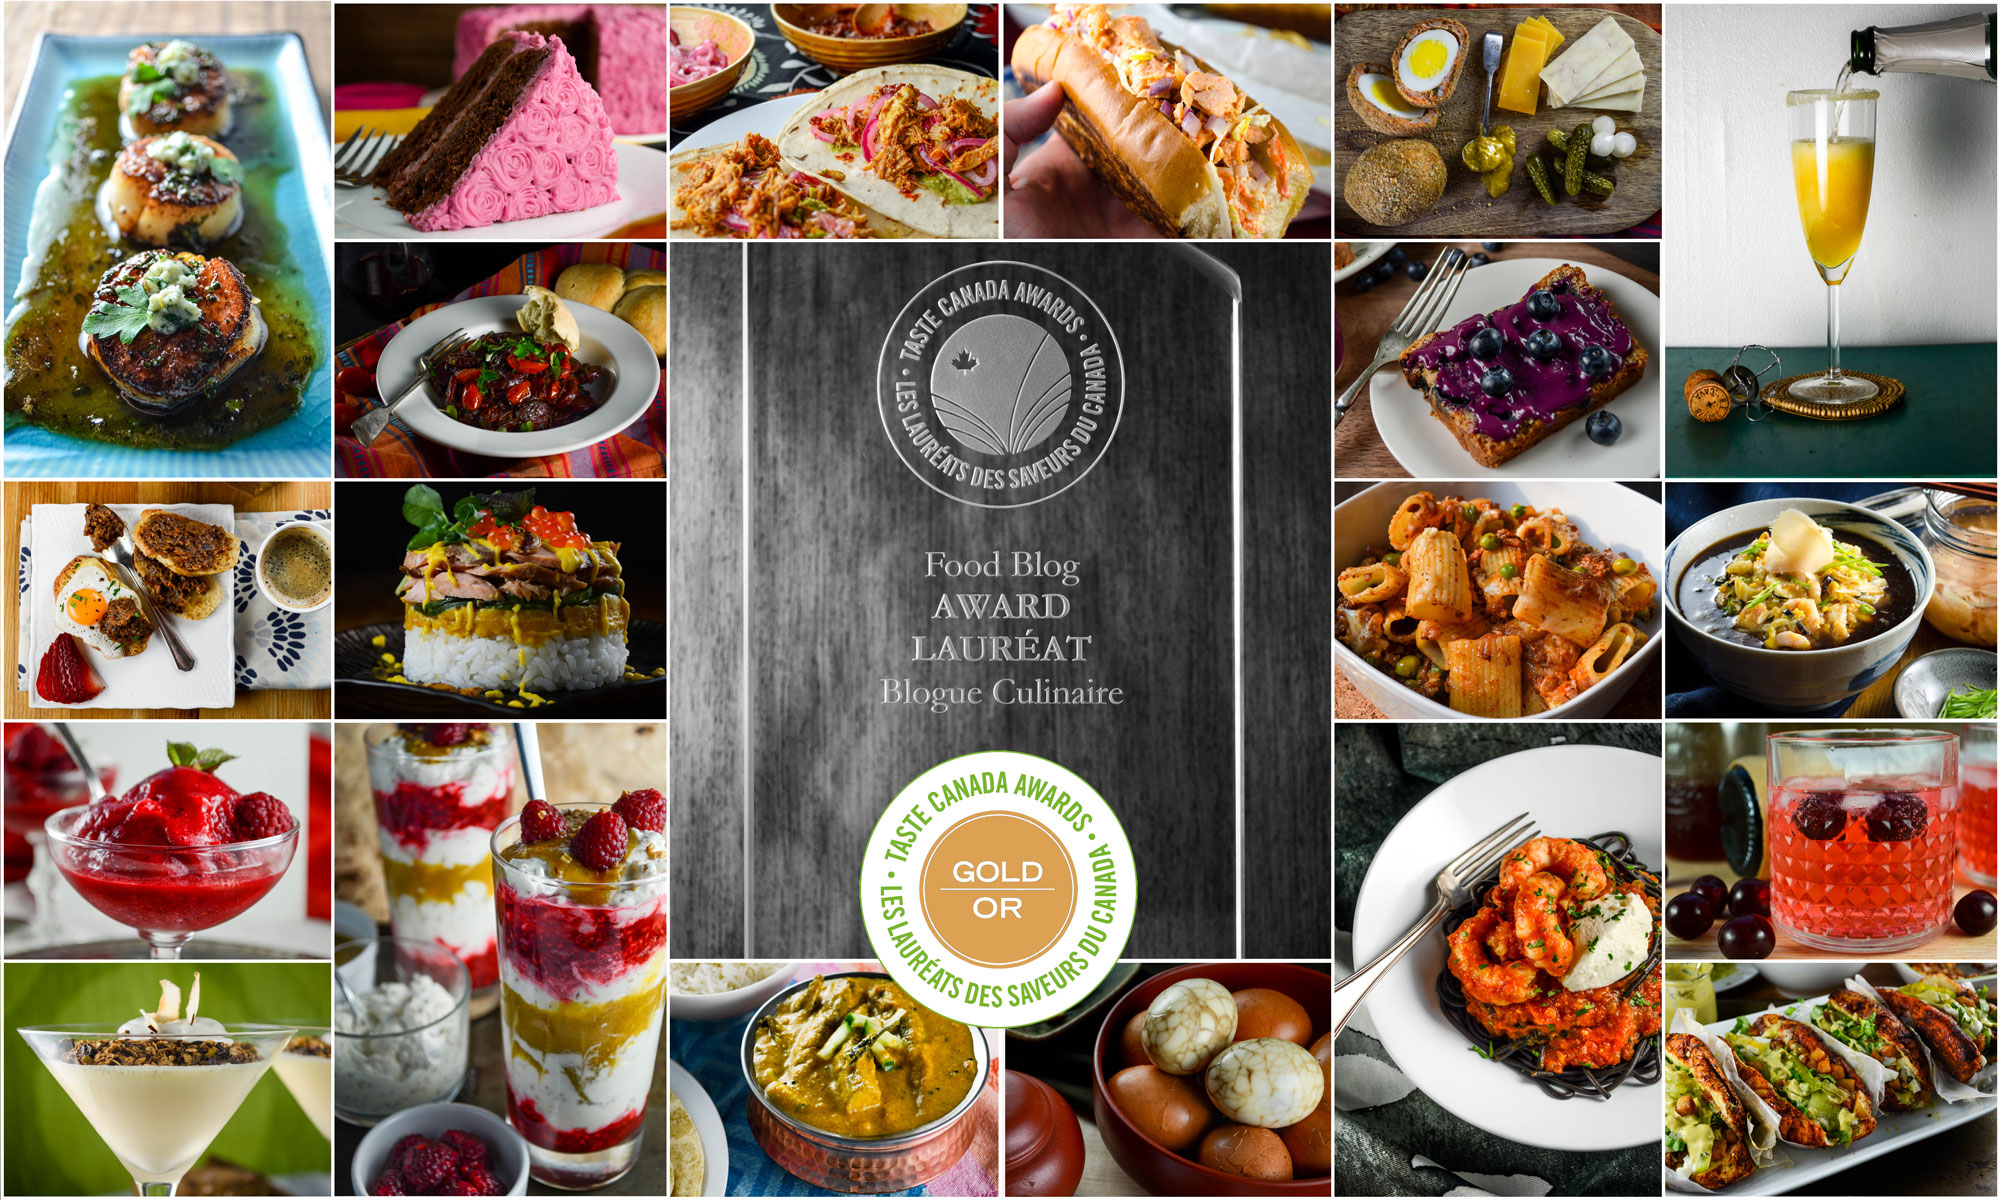 Various food images from Diversivore surrounding a picture of a Taste Canada award for Best Food Blog